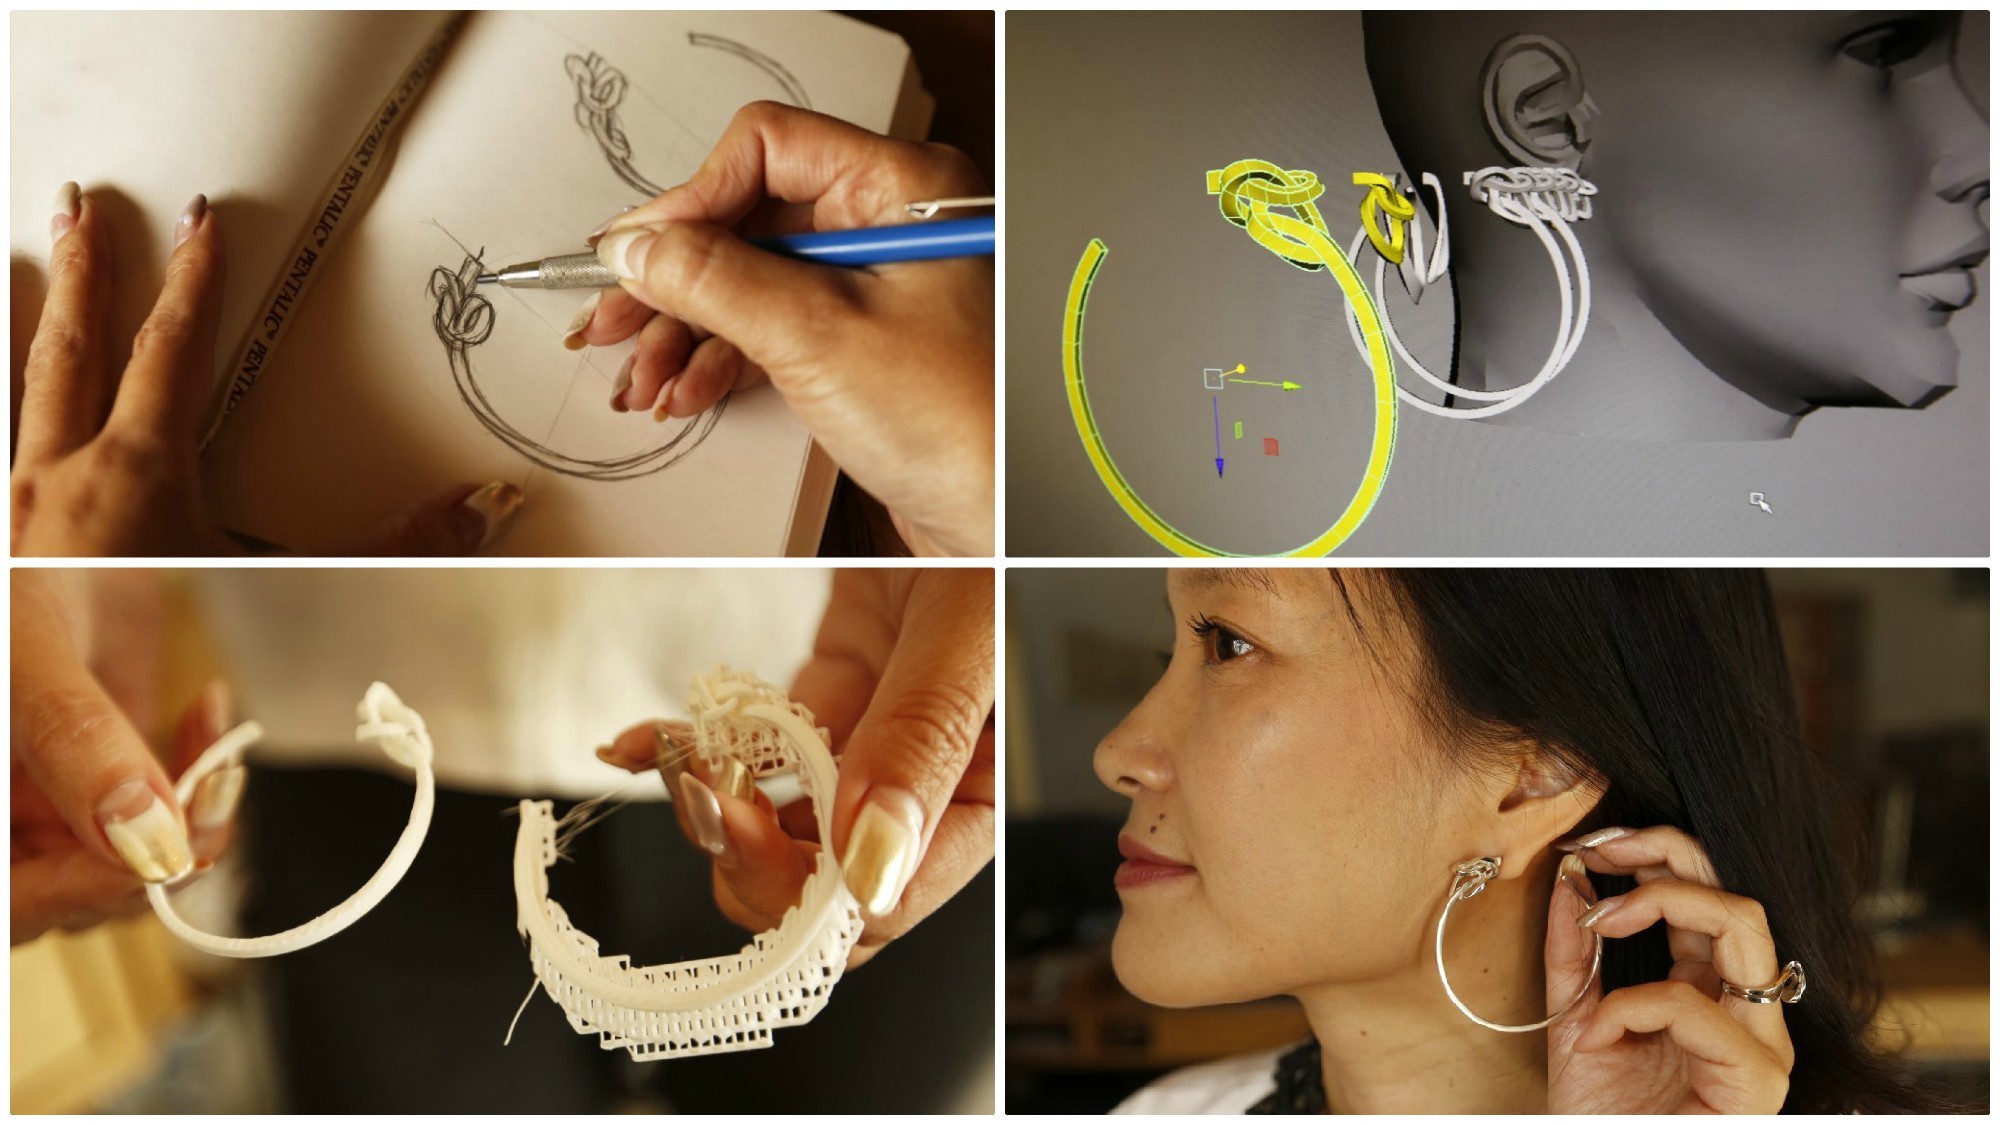 The steps Wu takes in making 3-D printed jewelry include hand sketches, computer modeling and plastic forms.